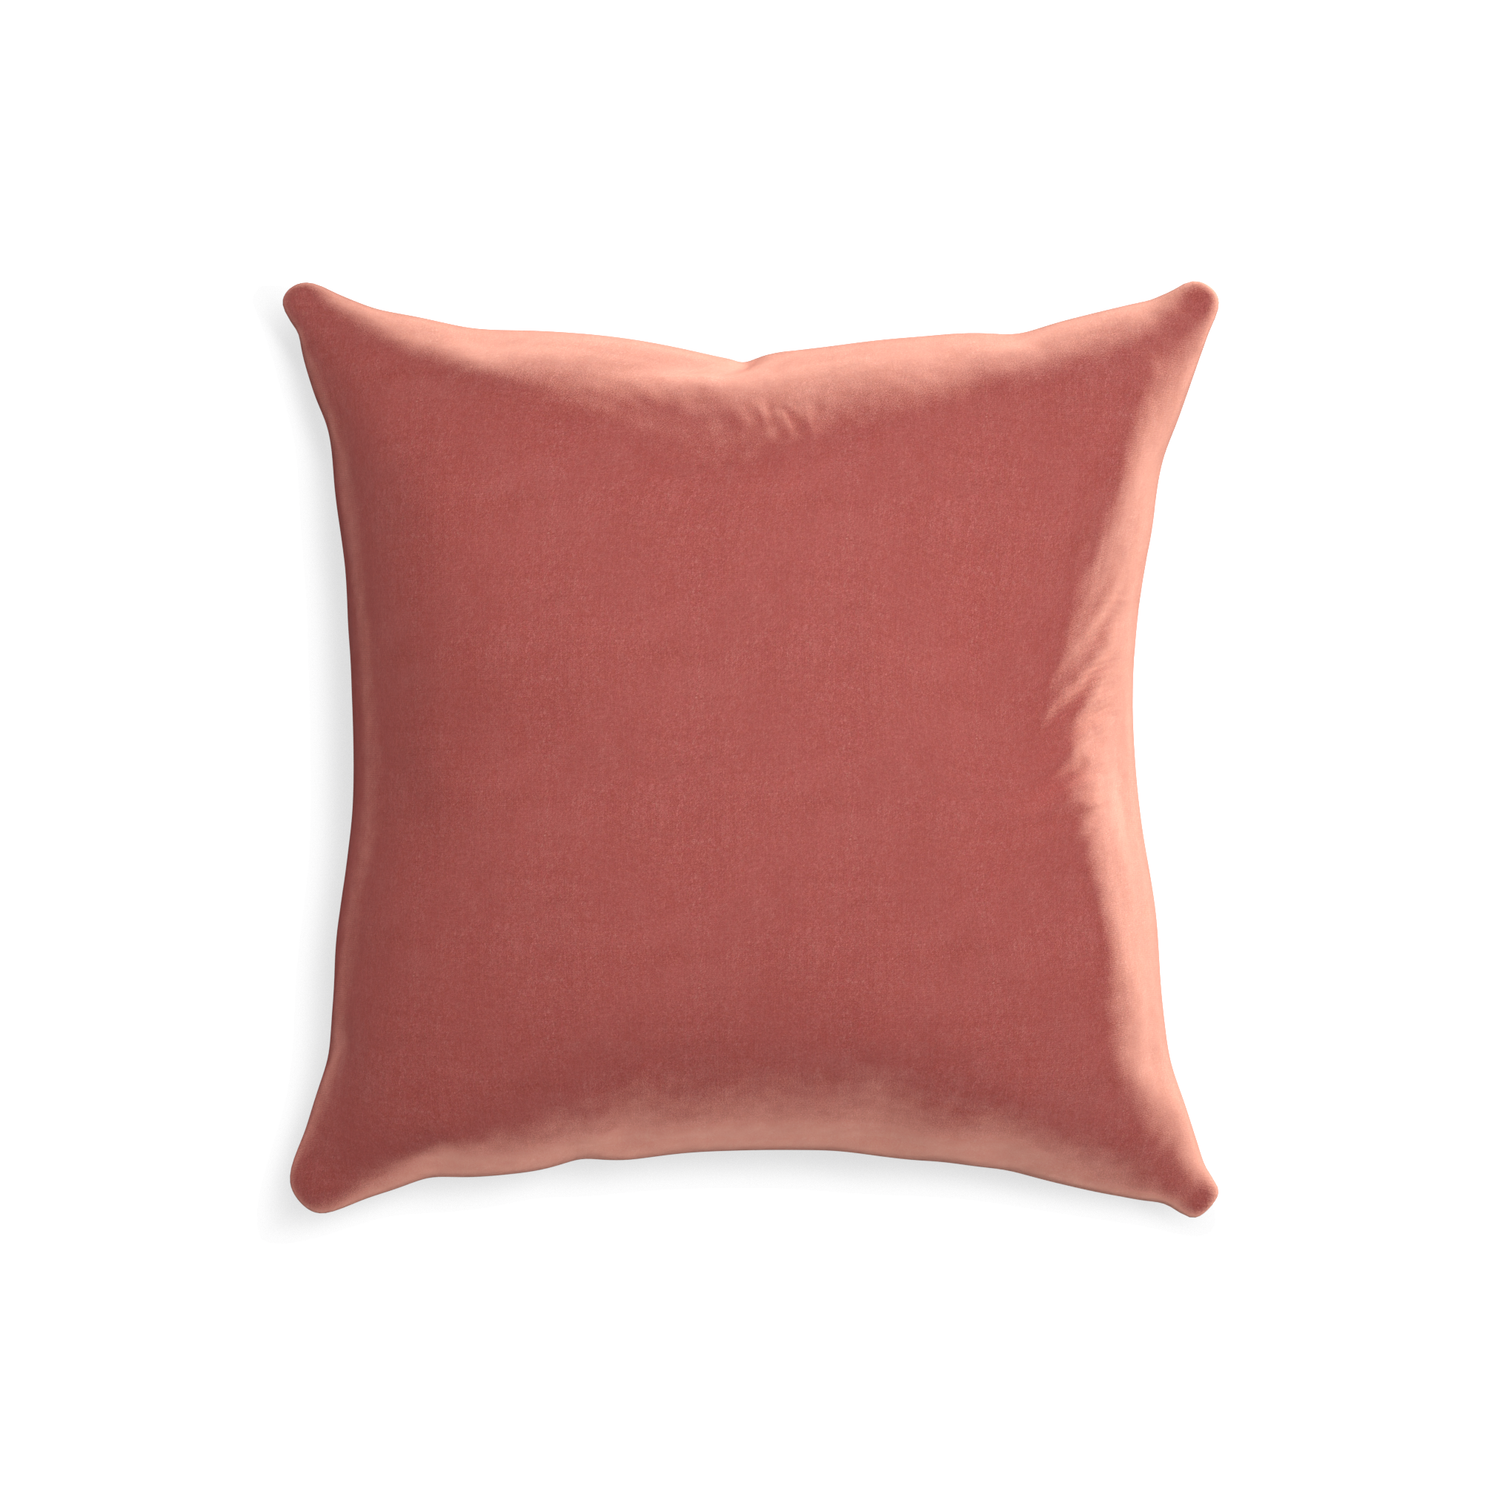 20-square cosmo velvet custom coralpillow with none on white background